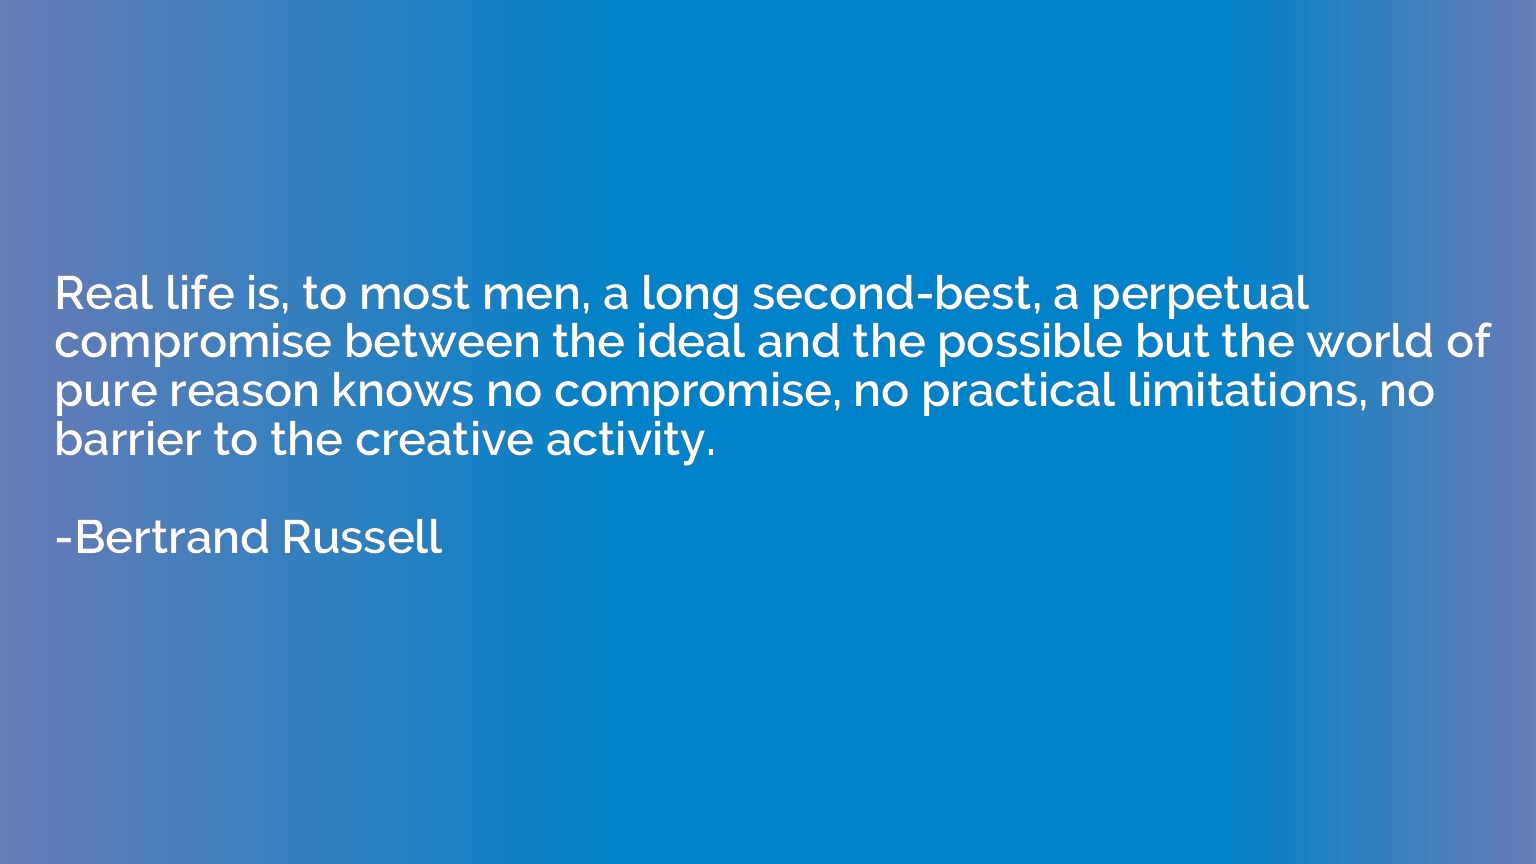 Real life is, to most men, a long second-best, a perpetual c